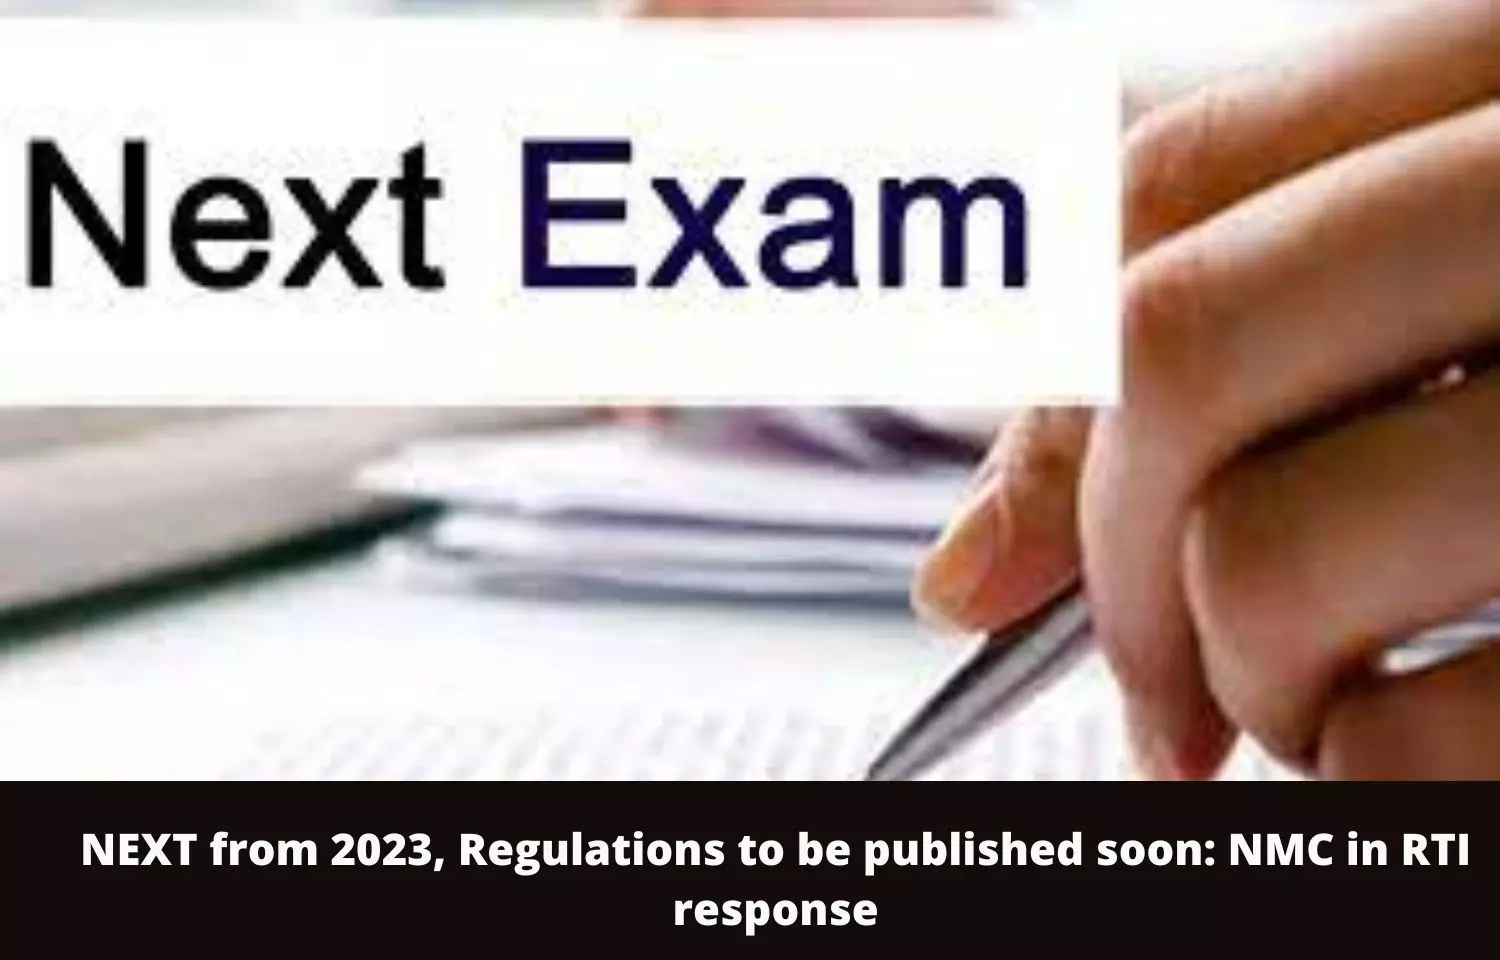 NEXT from 2023, Regulations to be published soon: NMC in RTI response